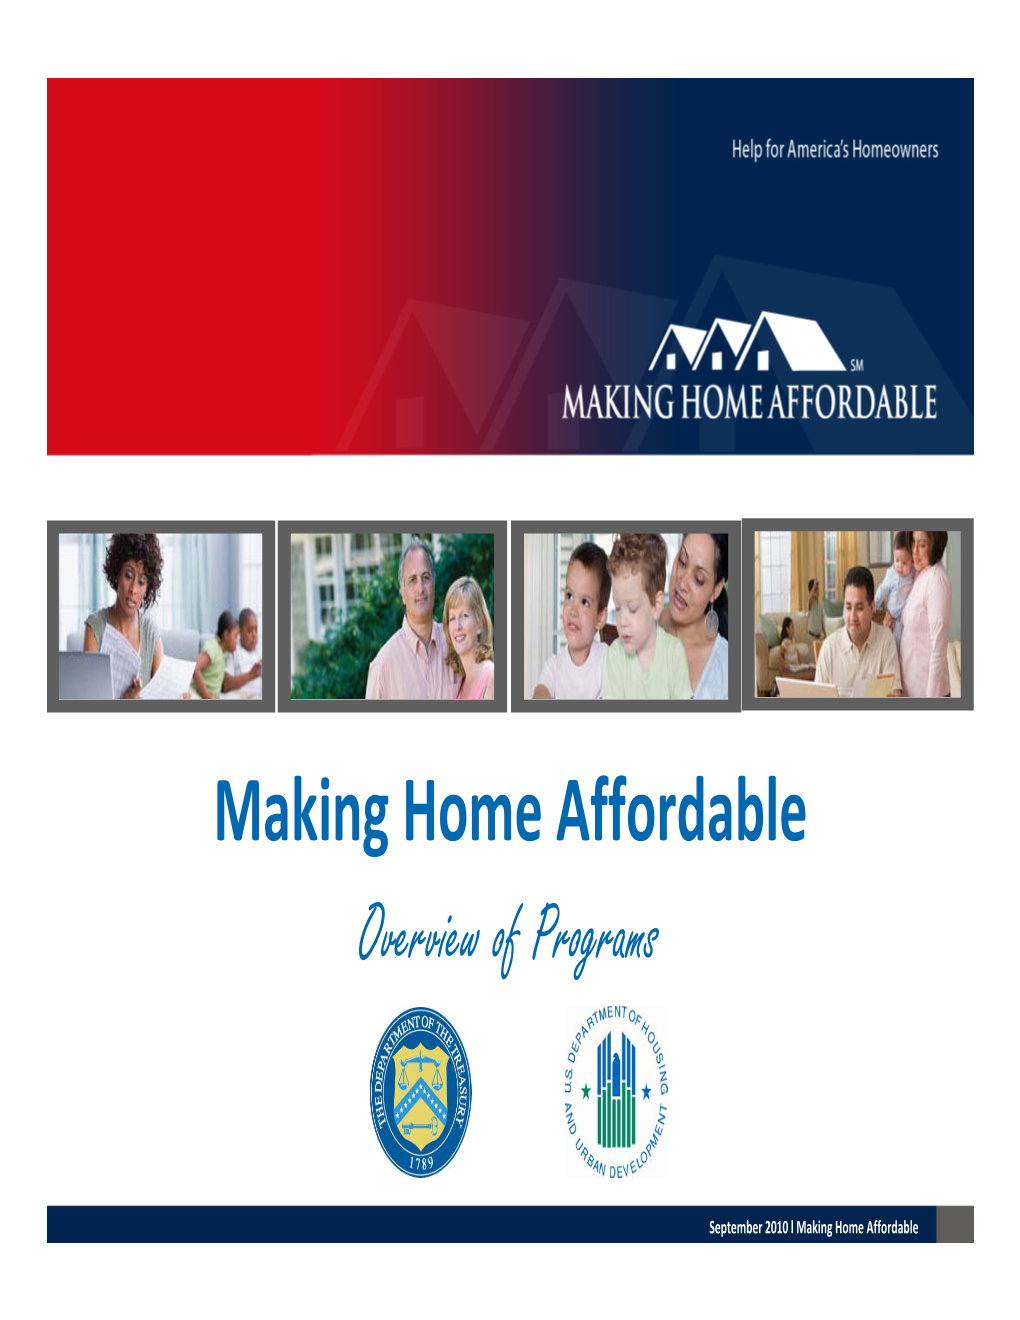 Making Home Affordable Overview of Programs